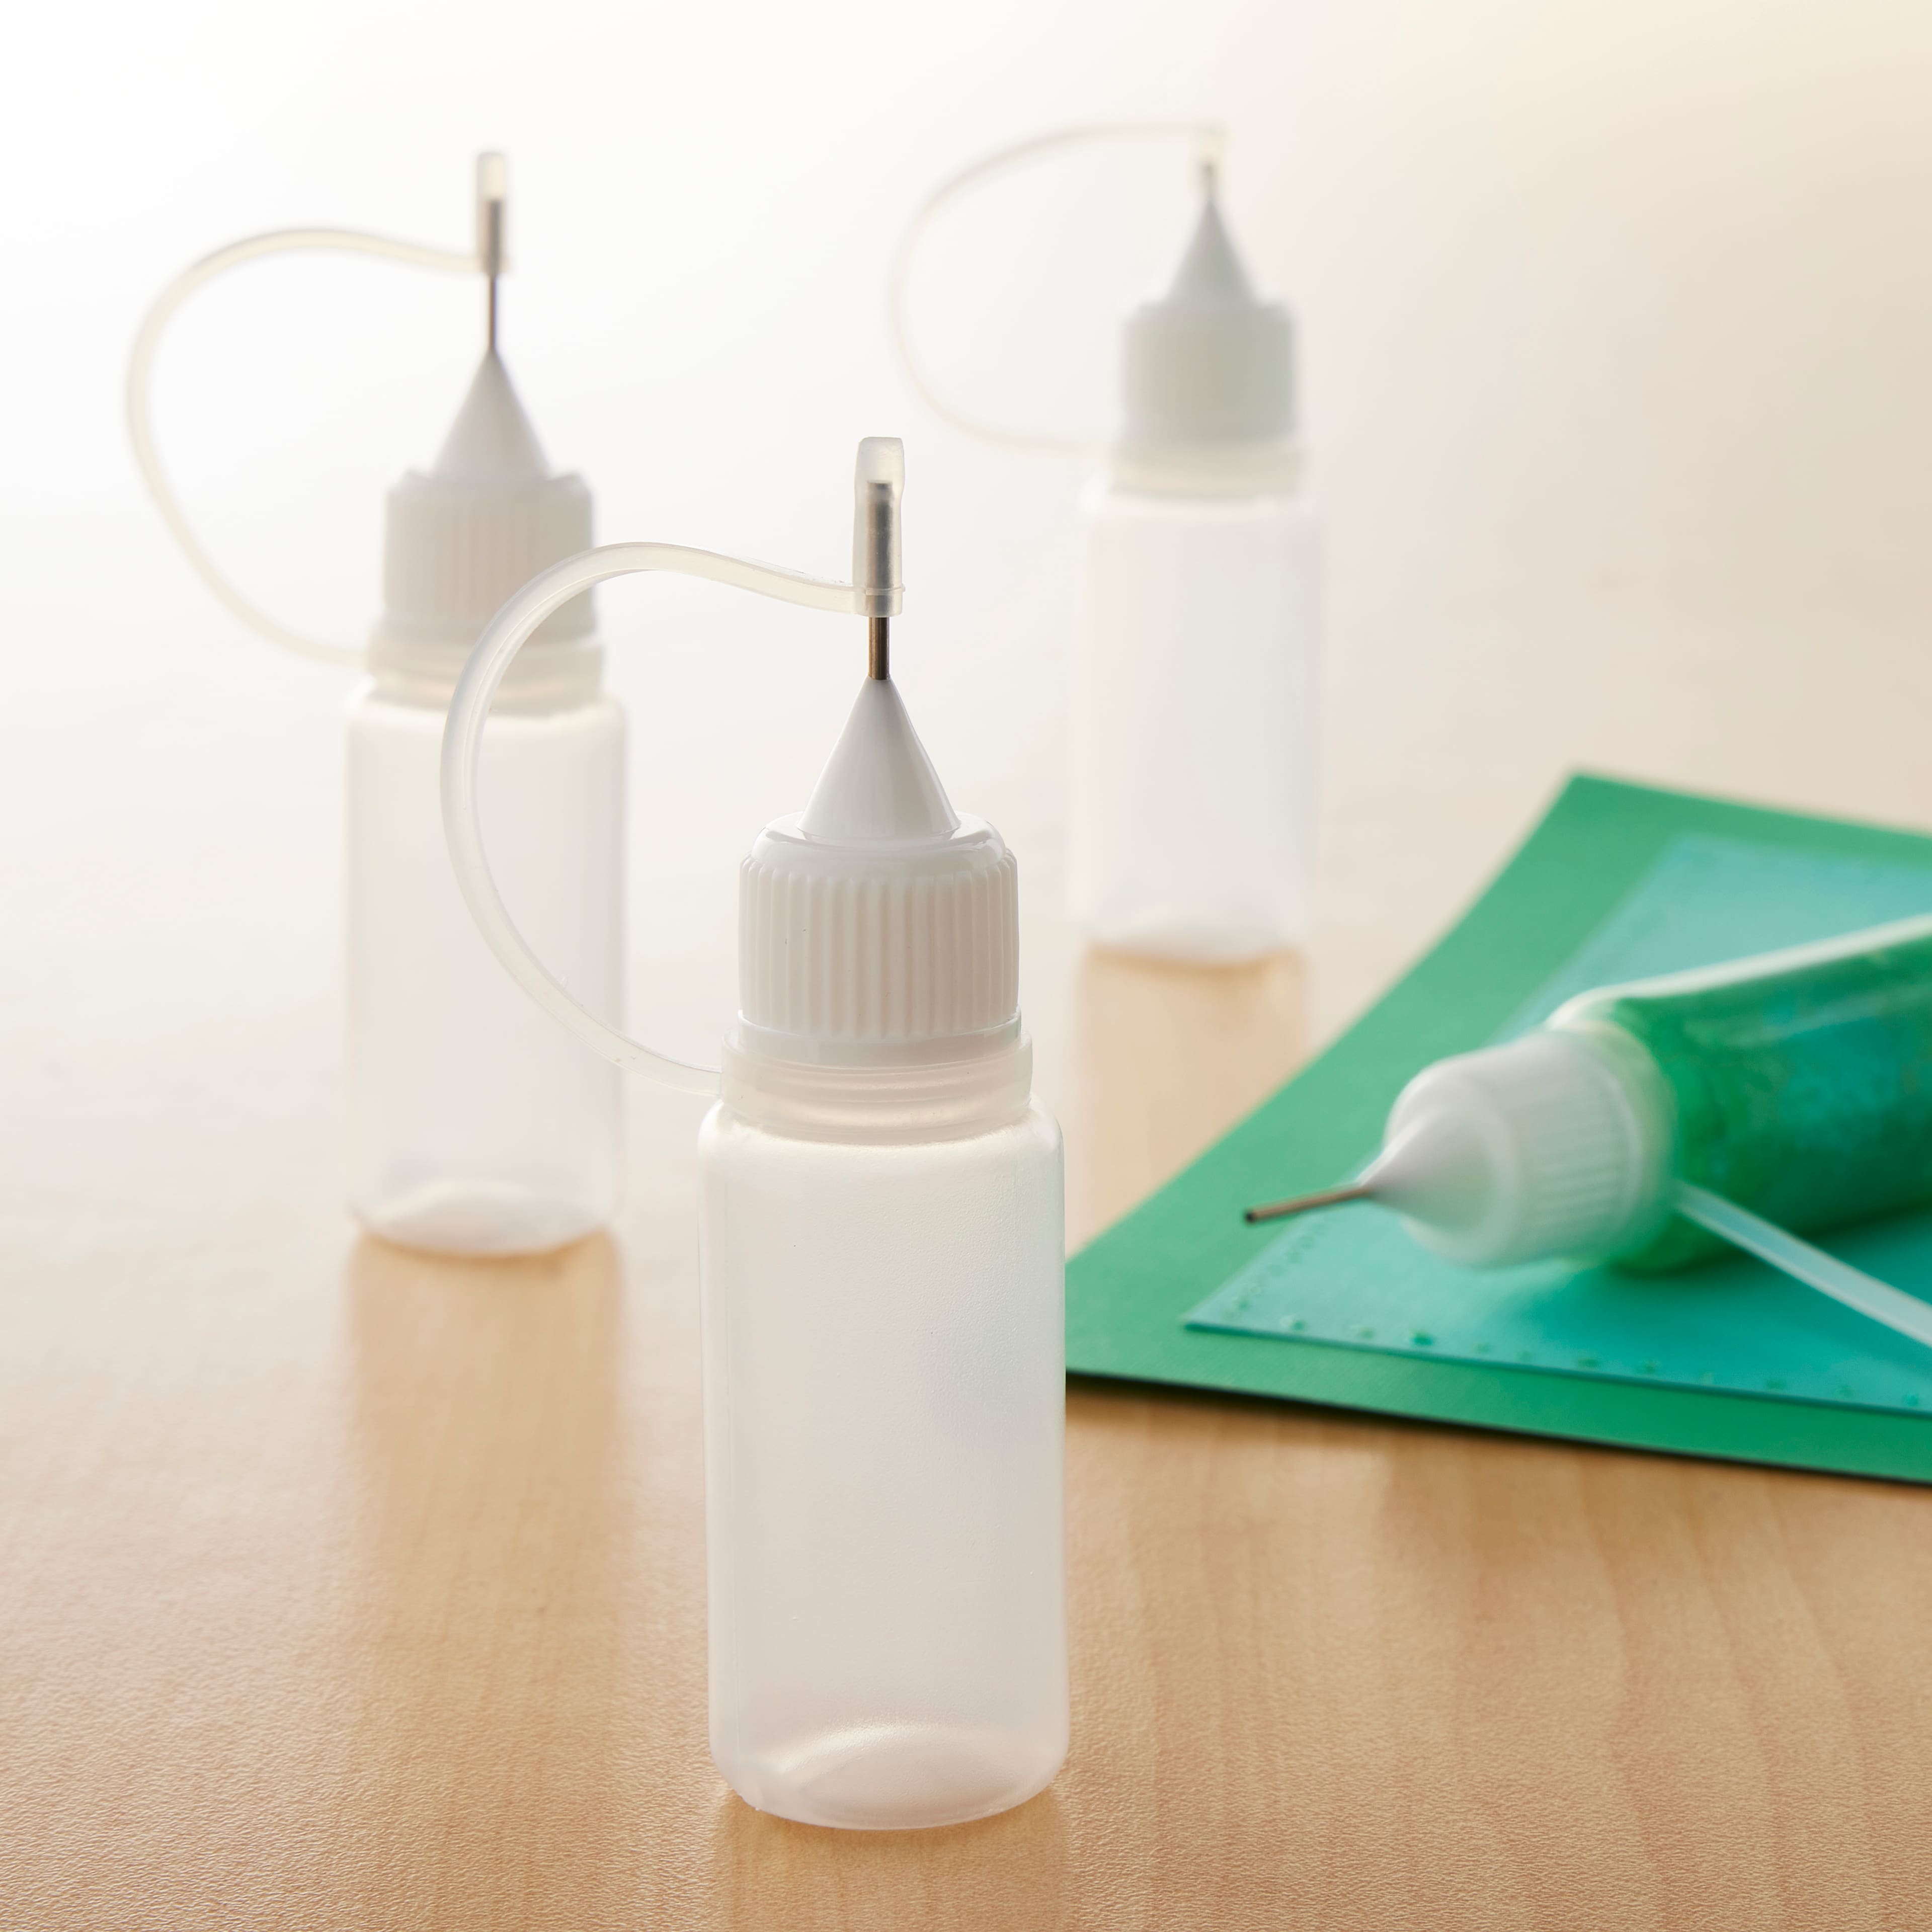 10pcs 30ml Plastic Squeezable Tip Applicator Refillable Dropper Bottles  With Needle Tip Caps For Gl